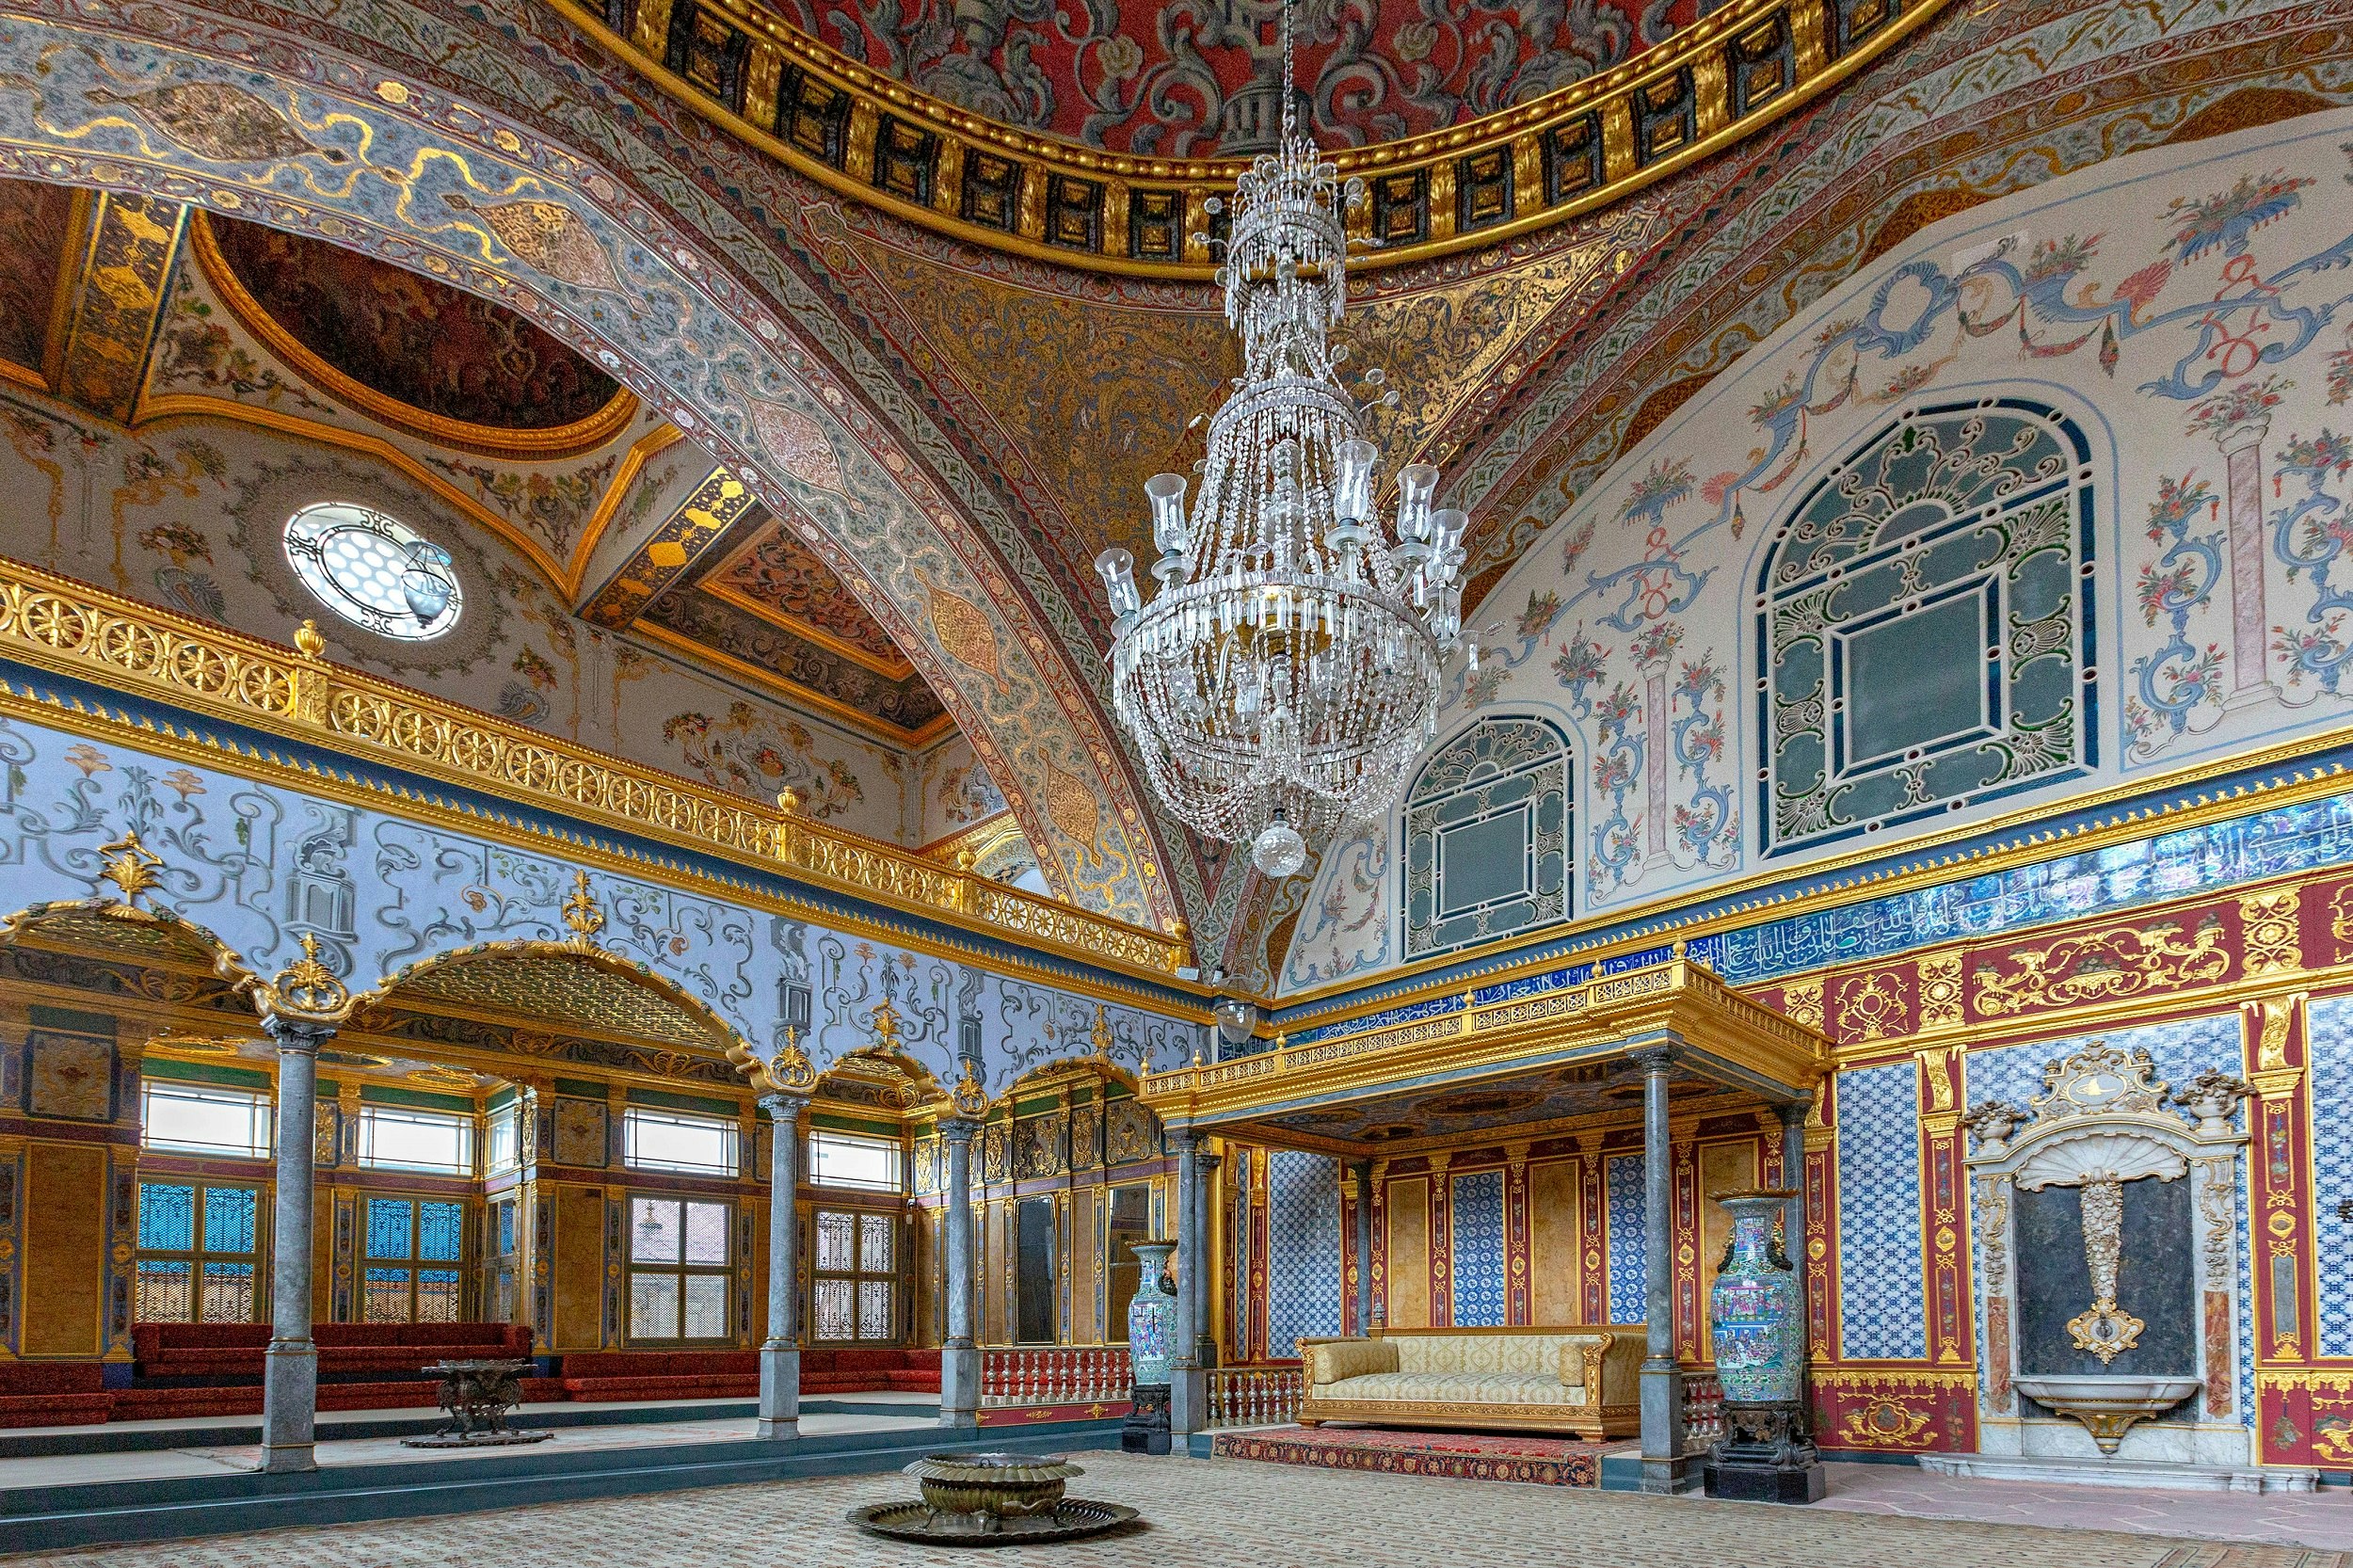 A grand room covered in ornate mosaic patterns, predominantly in gold, red and blue. A large chandelier hangs in the centre of the room